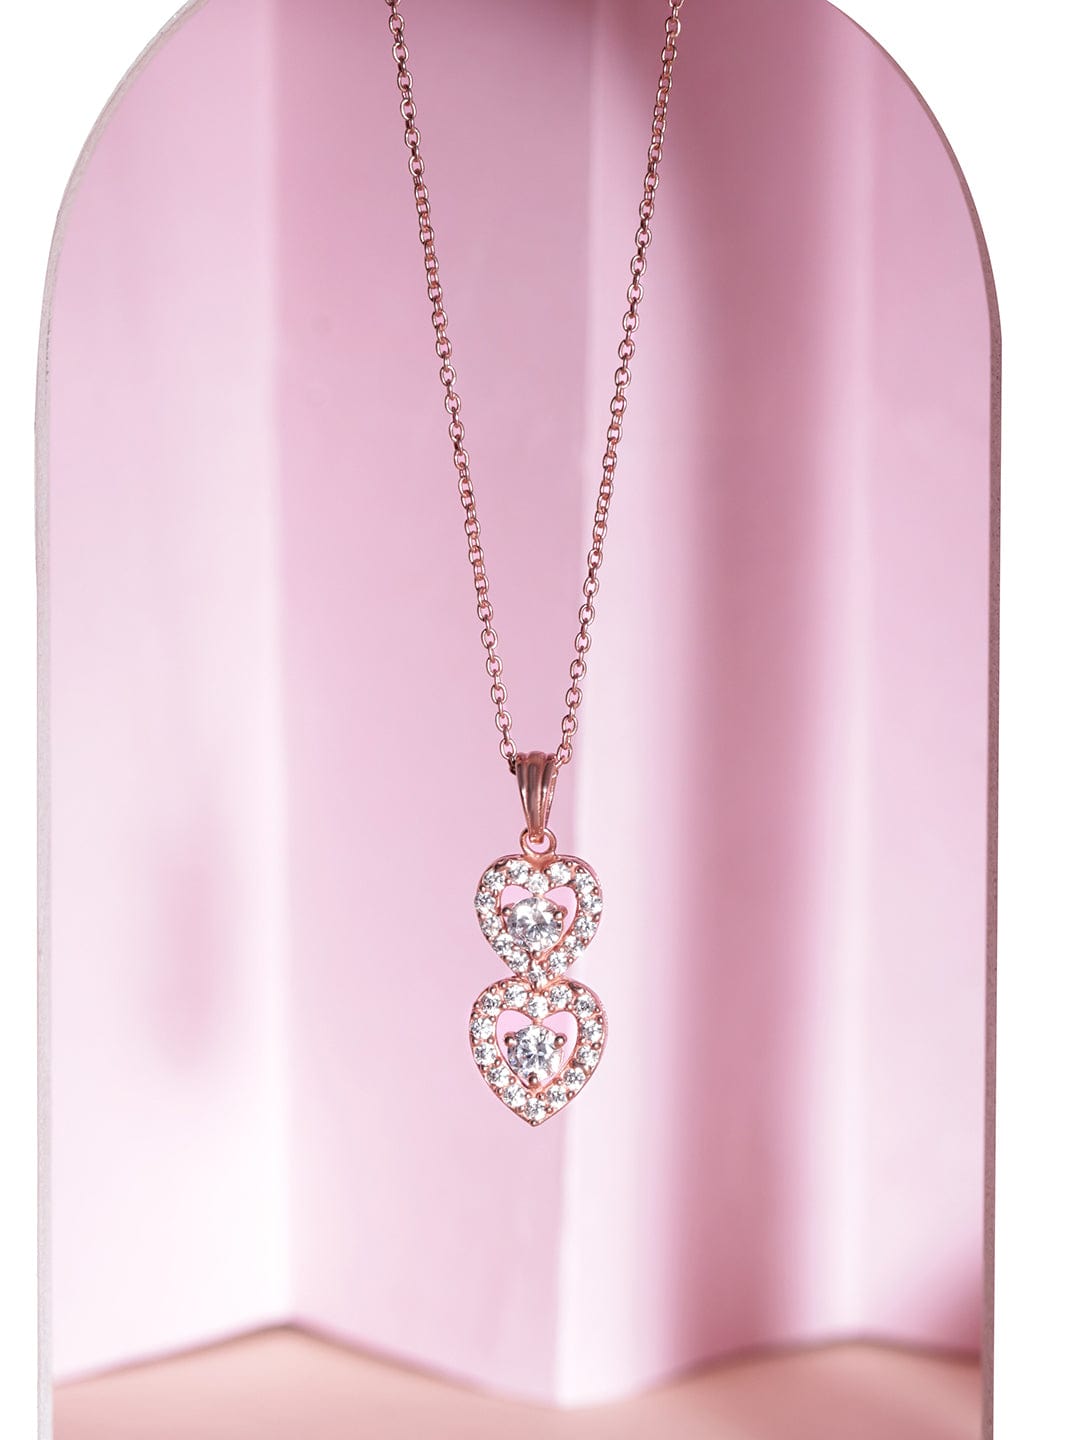 Letest RoseGold Toned 3 Layered Necklace With Heart, Pearl And American  Diamond Charms Rose Gold Plated Alloy Necklace